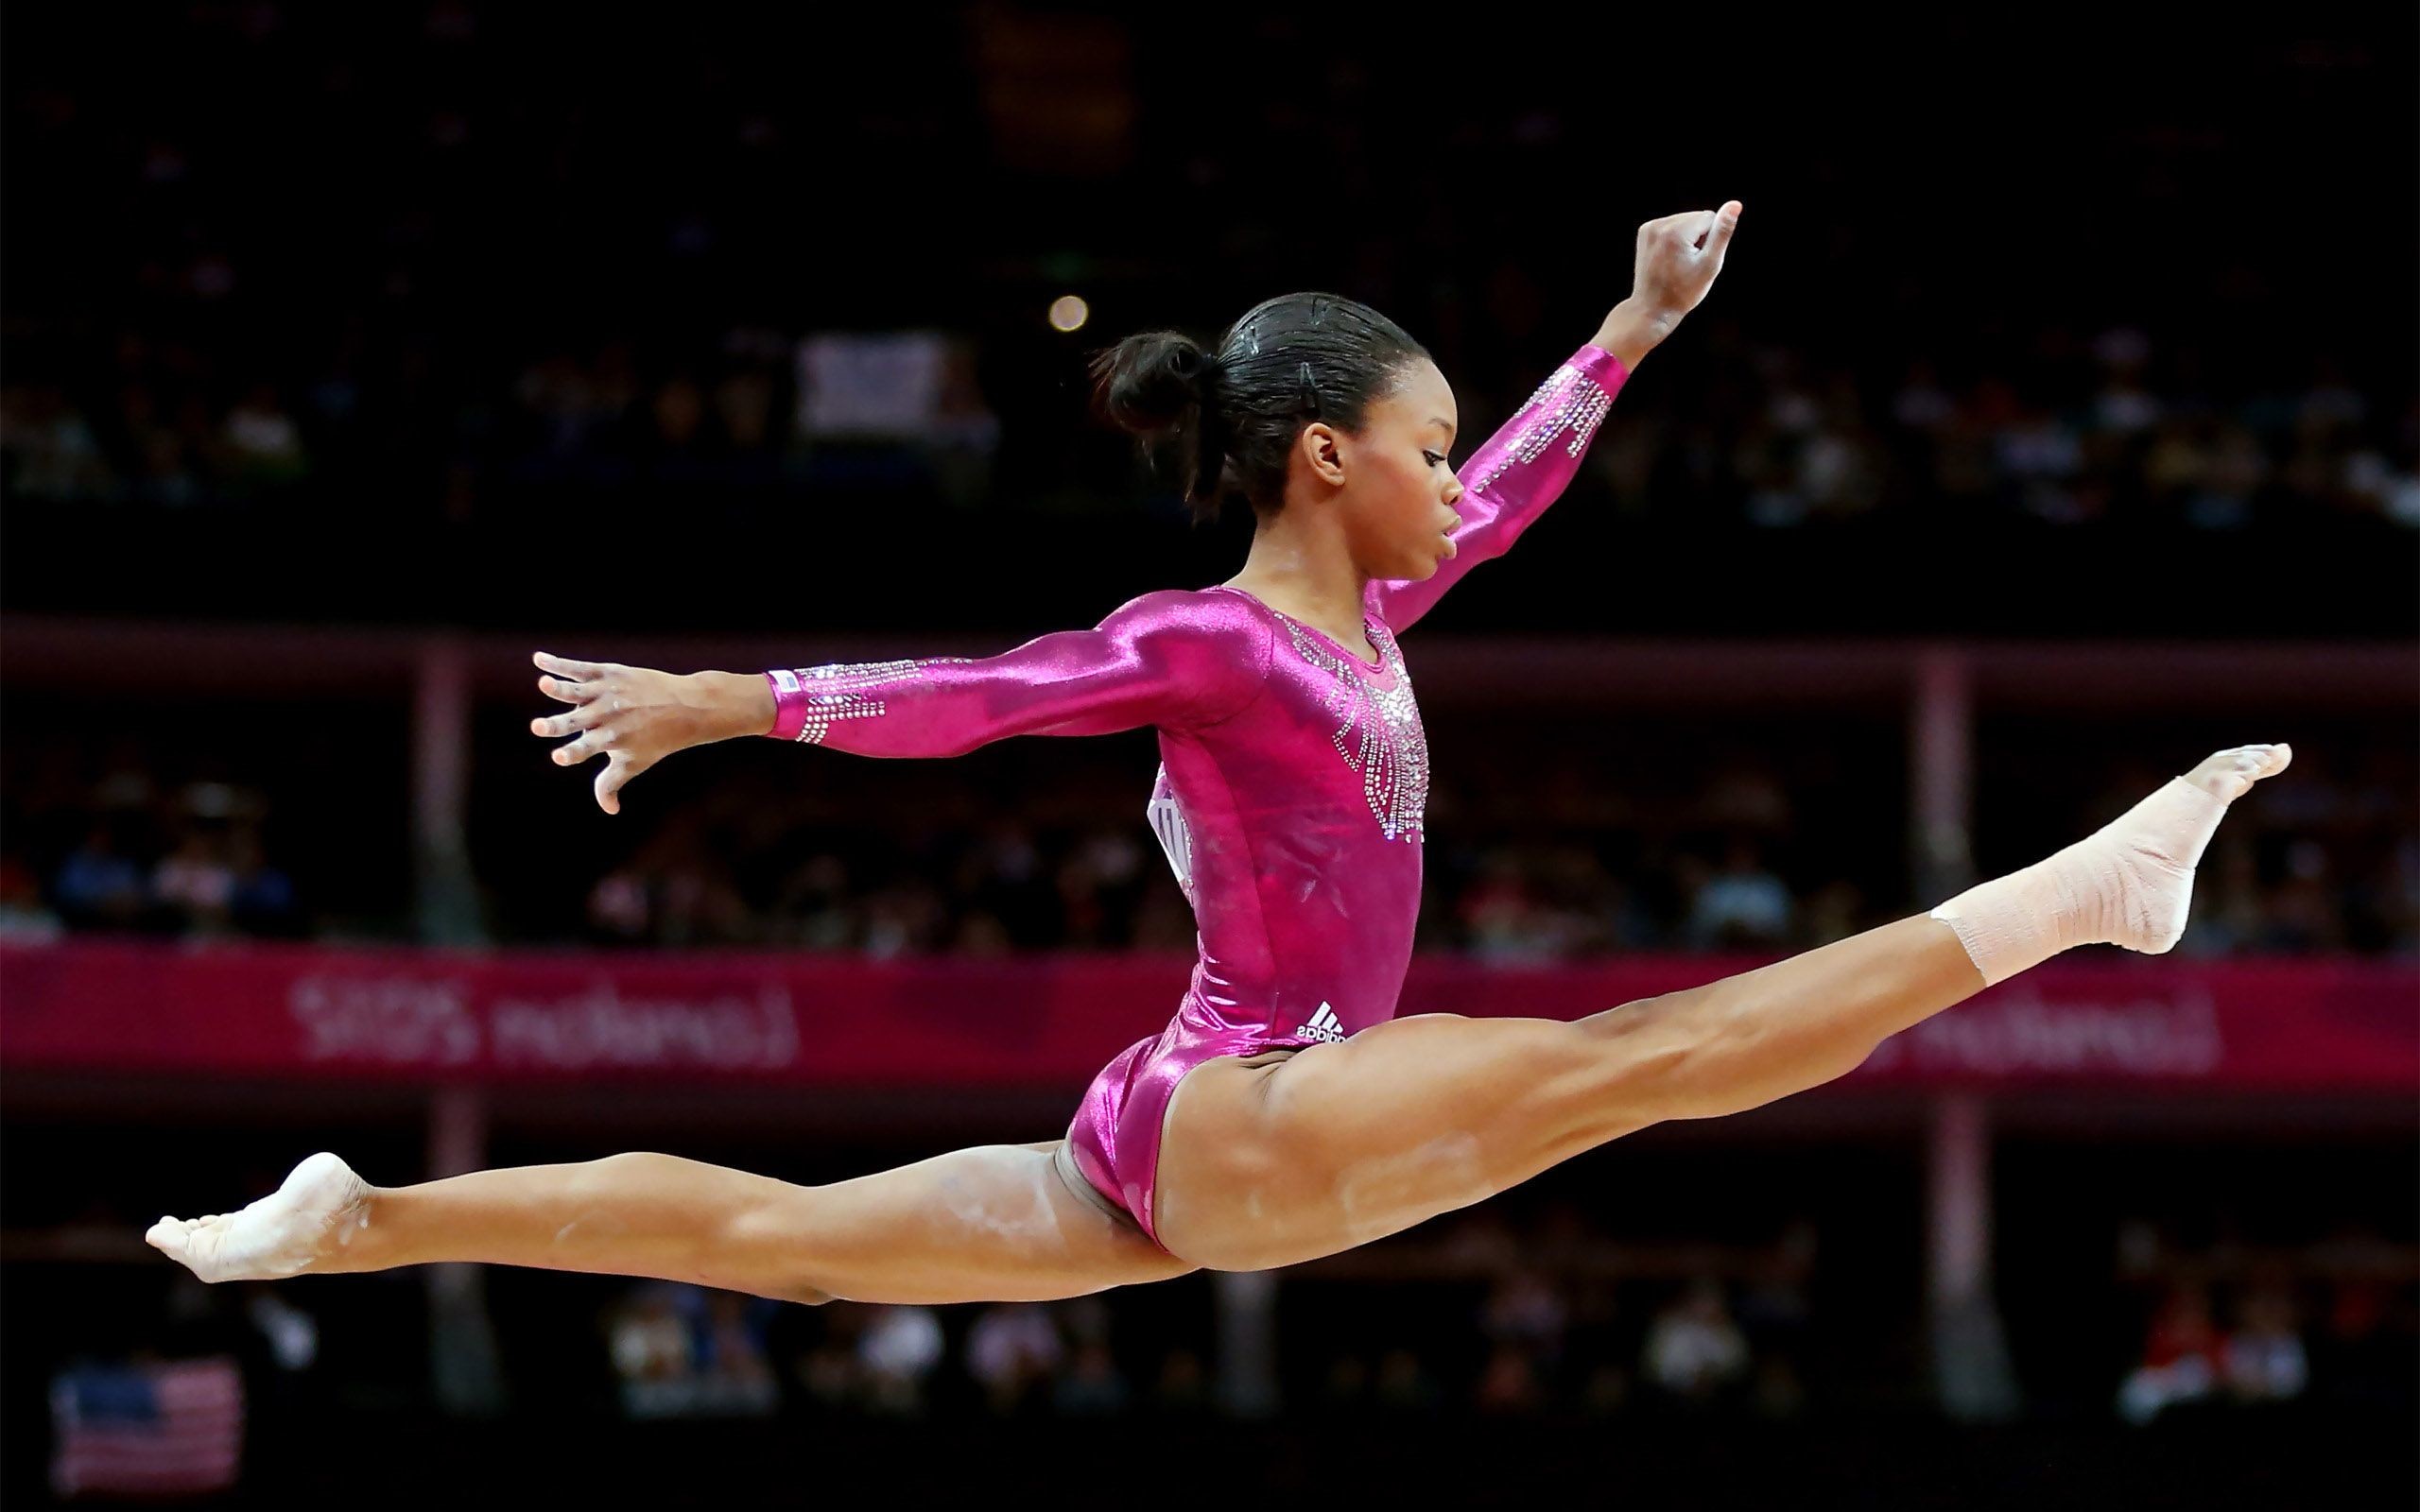 2560x1600 Top HDQ Gymnastics Images, Wallpapers - Cool RFV42 Collection